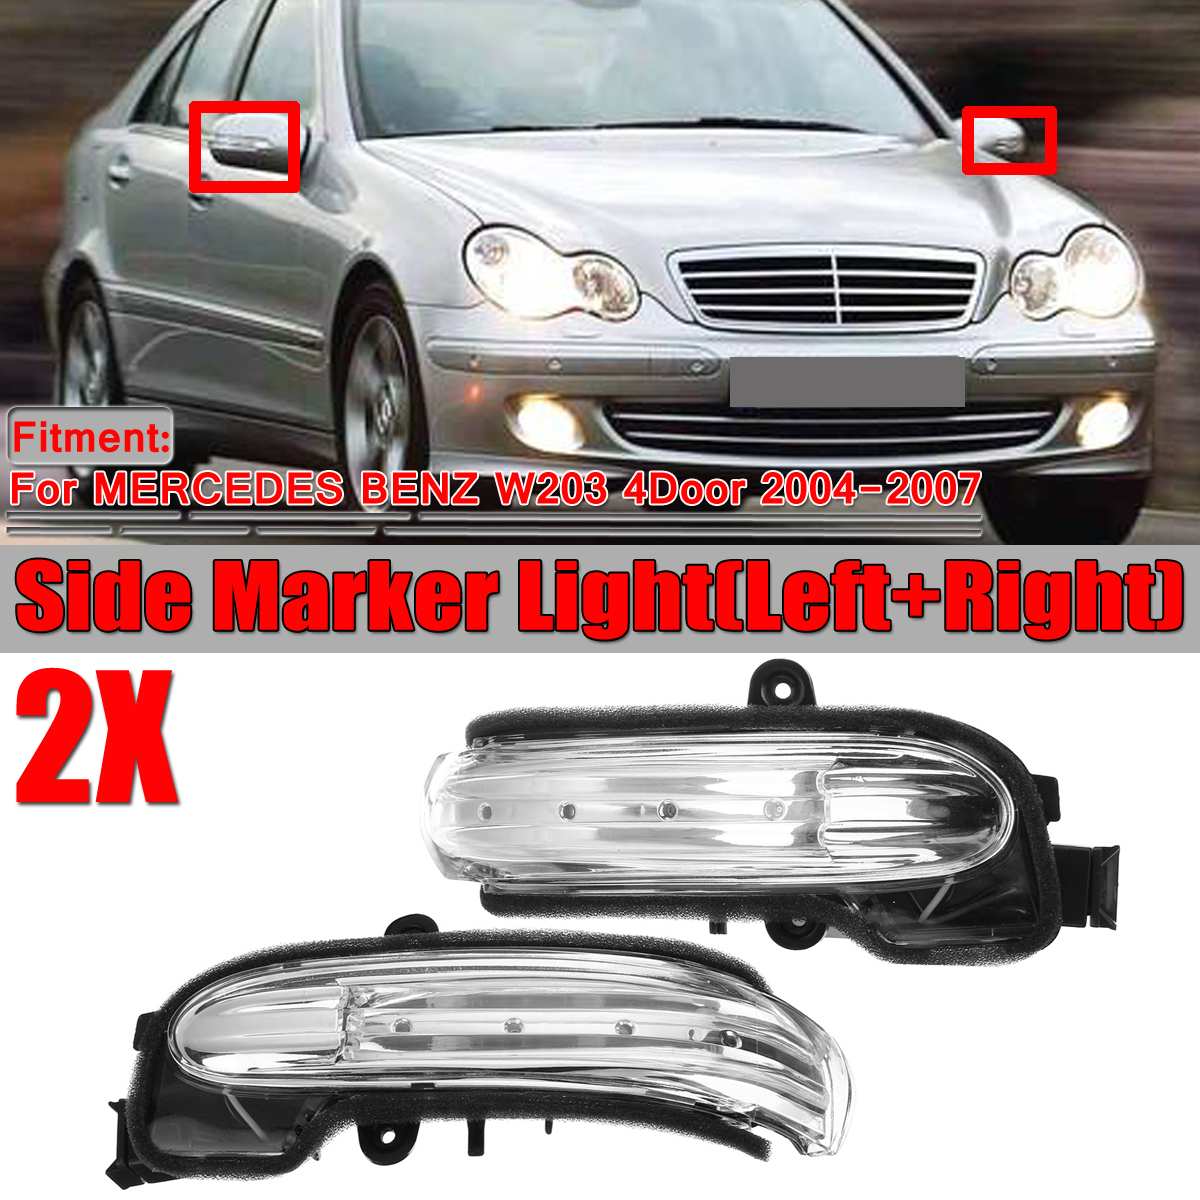 2x Mercedes E-Class W211 18-LED Front Indicator Repeater Turn Signal Light Bulbs 